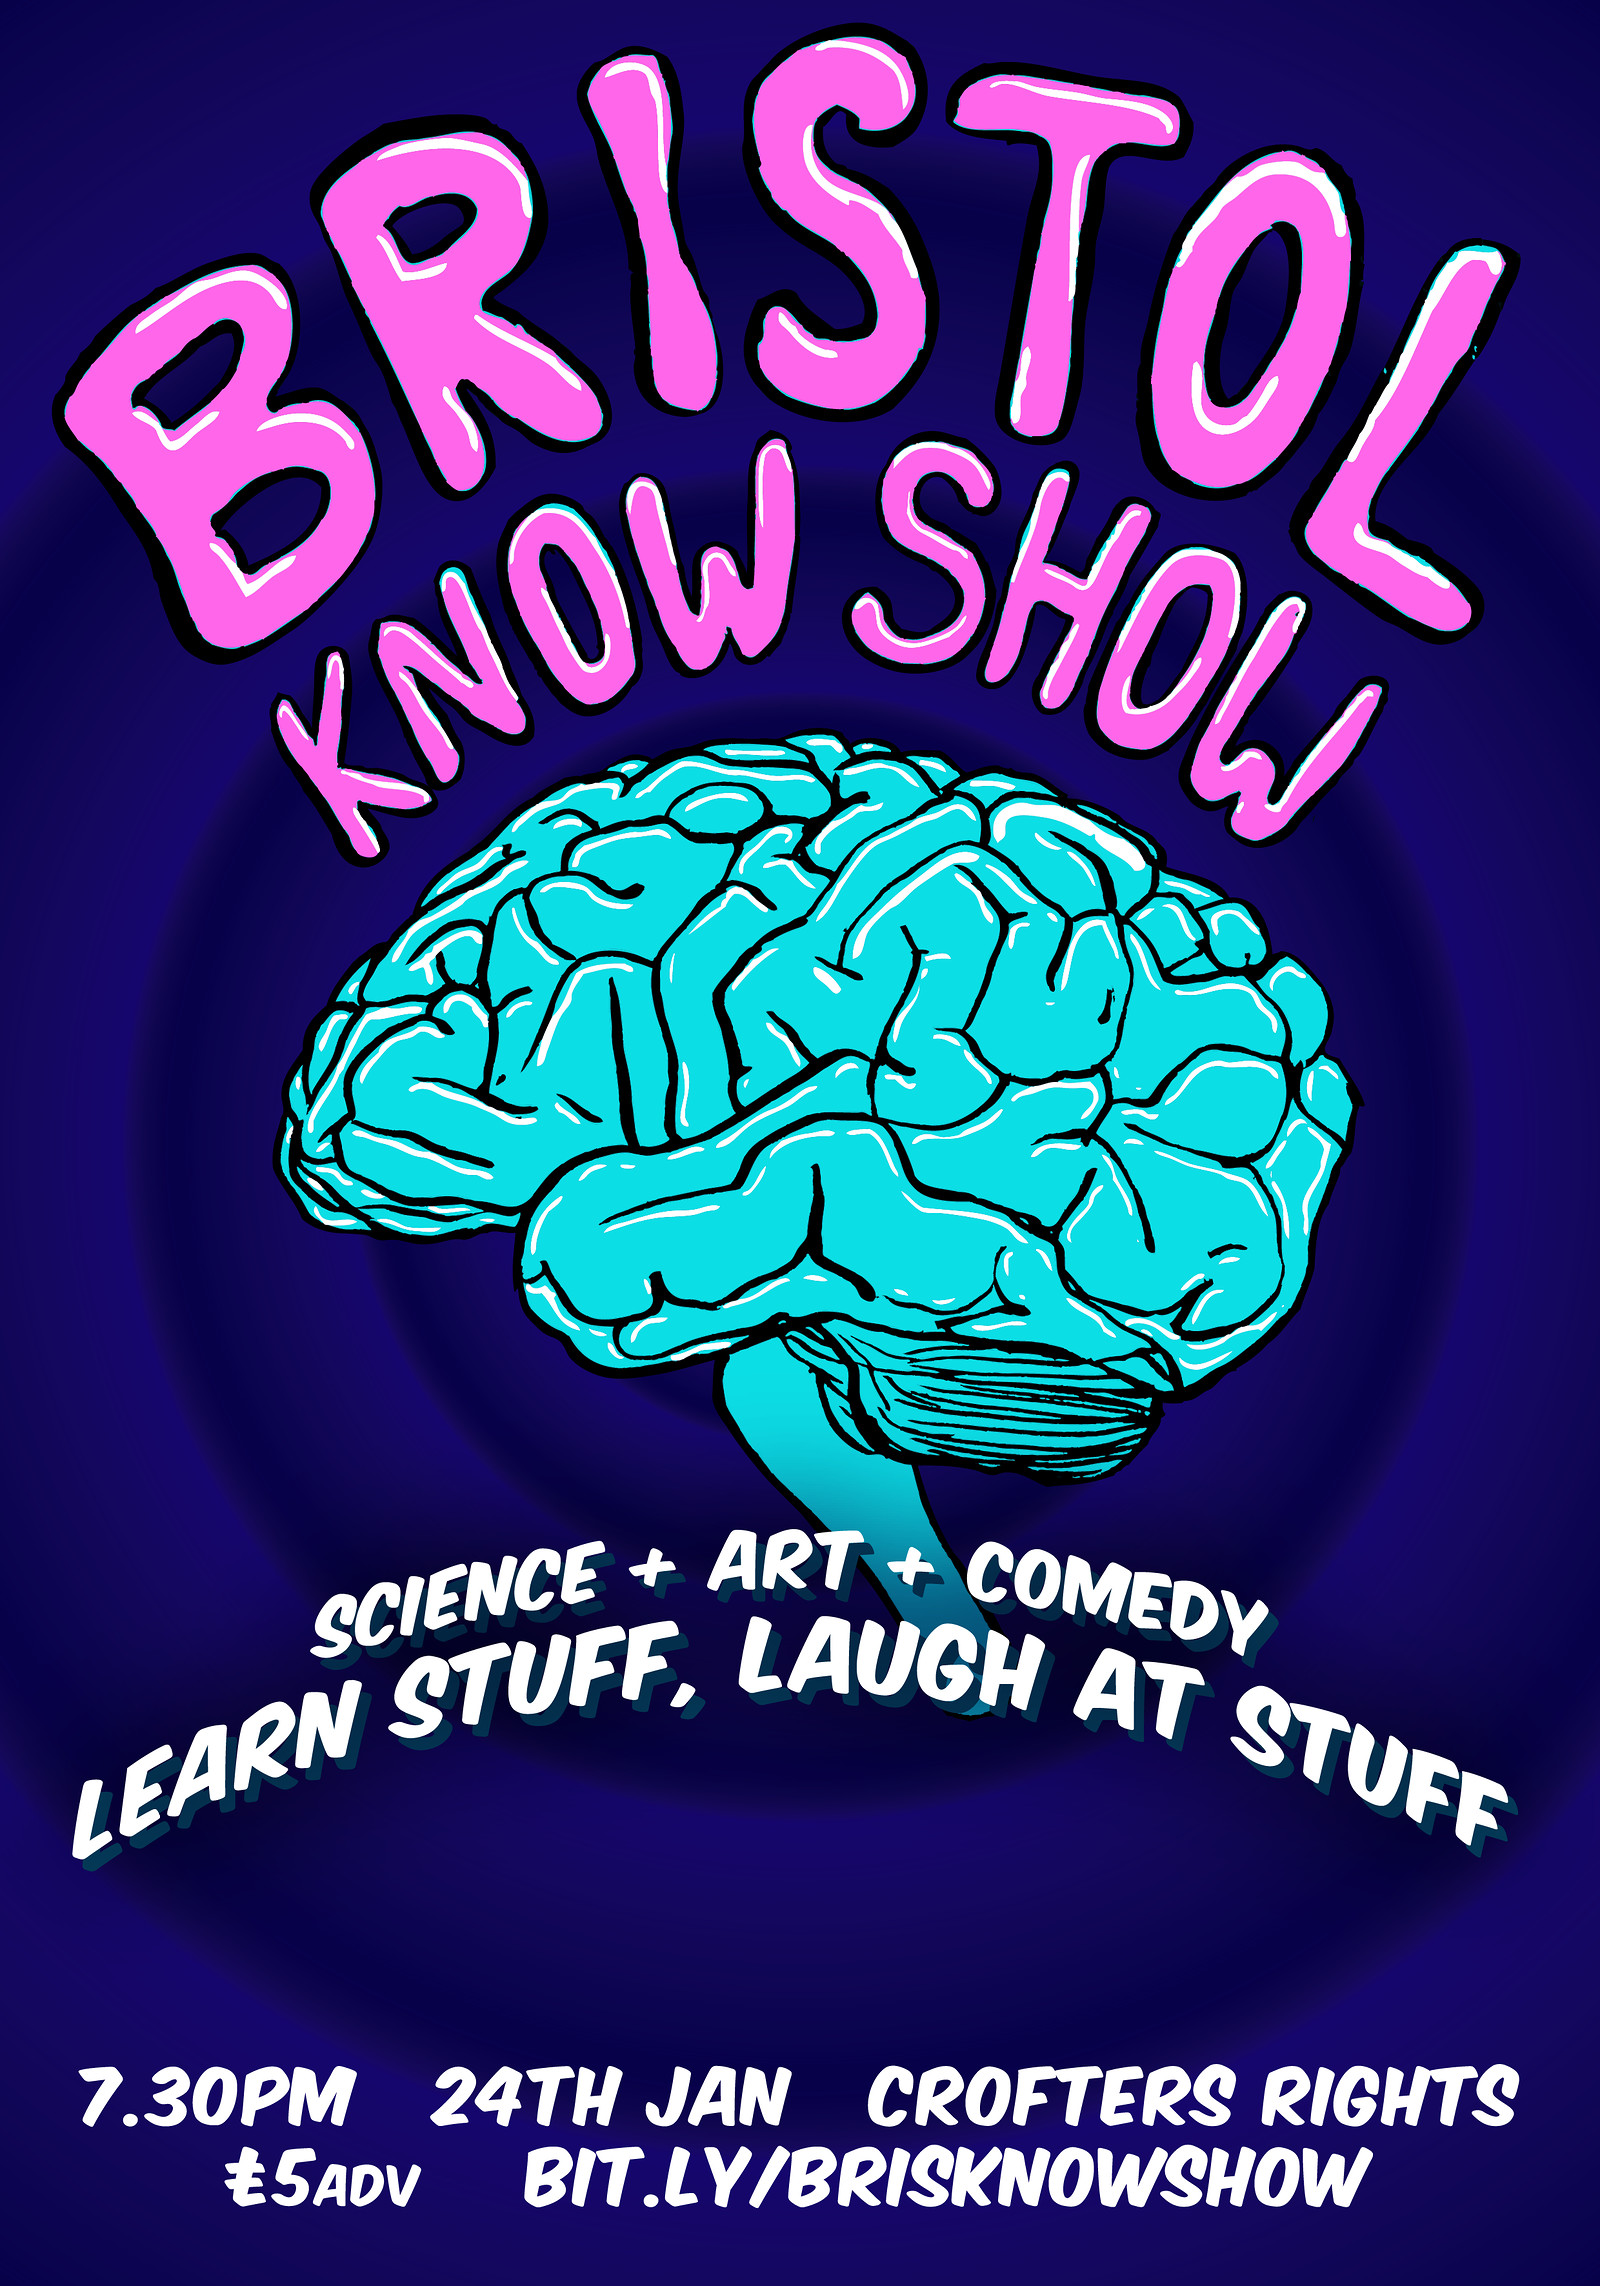 The Know Show at Crofters Rights